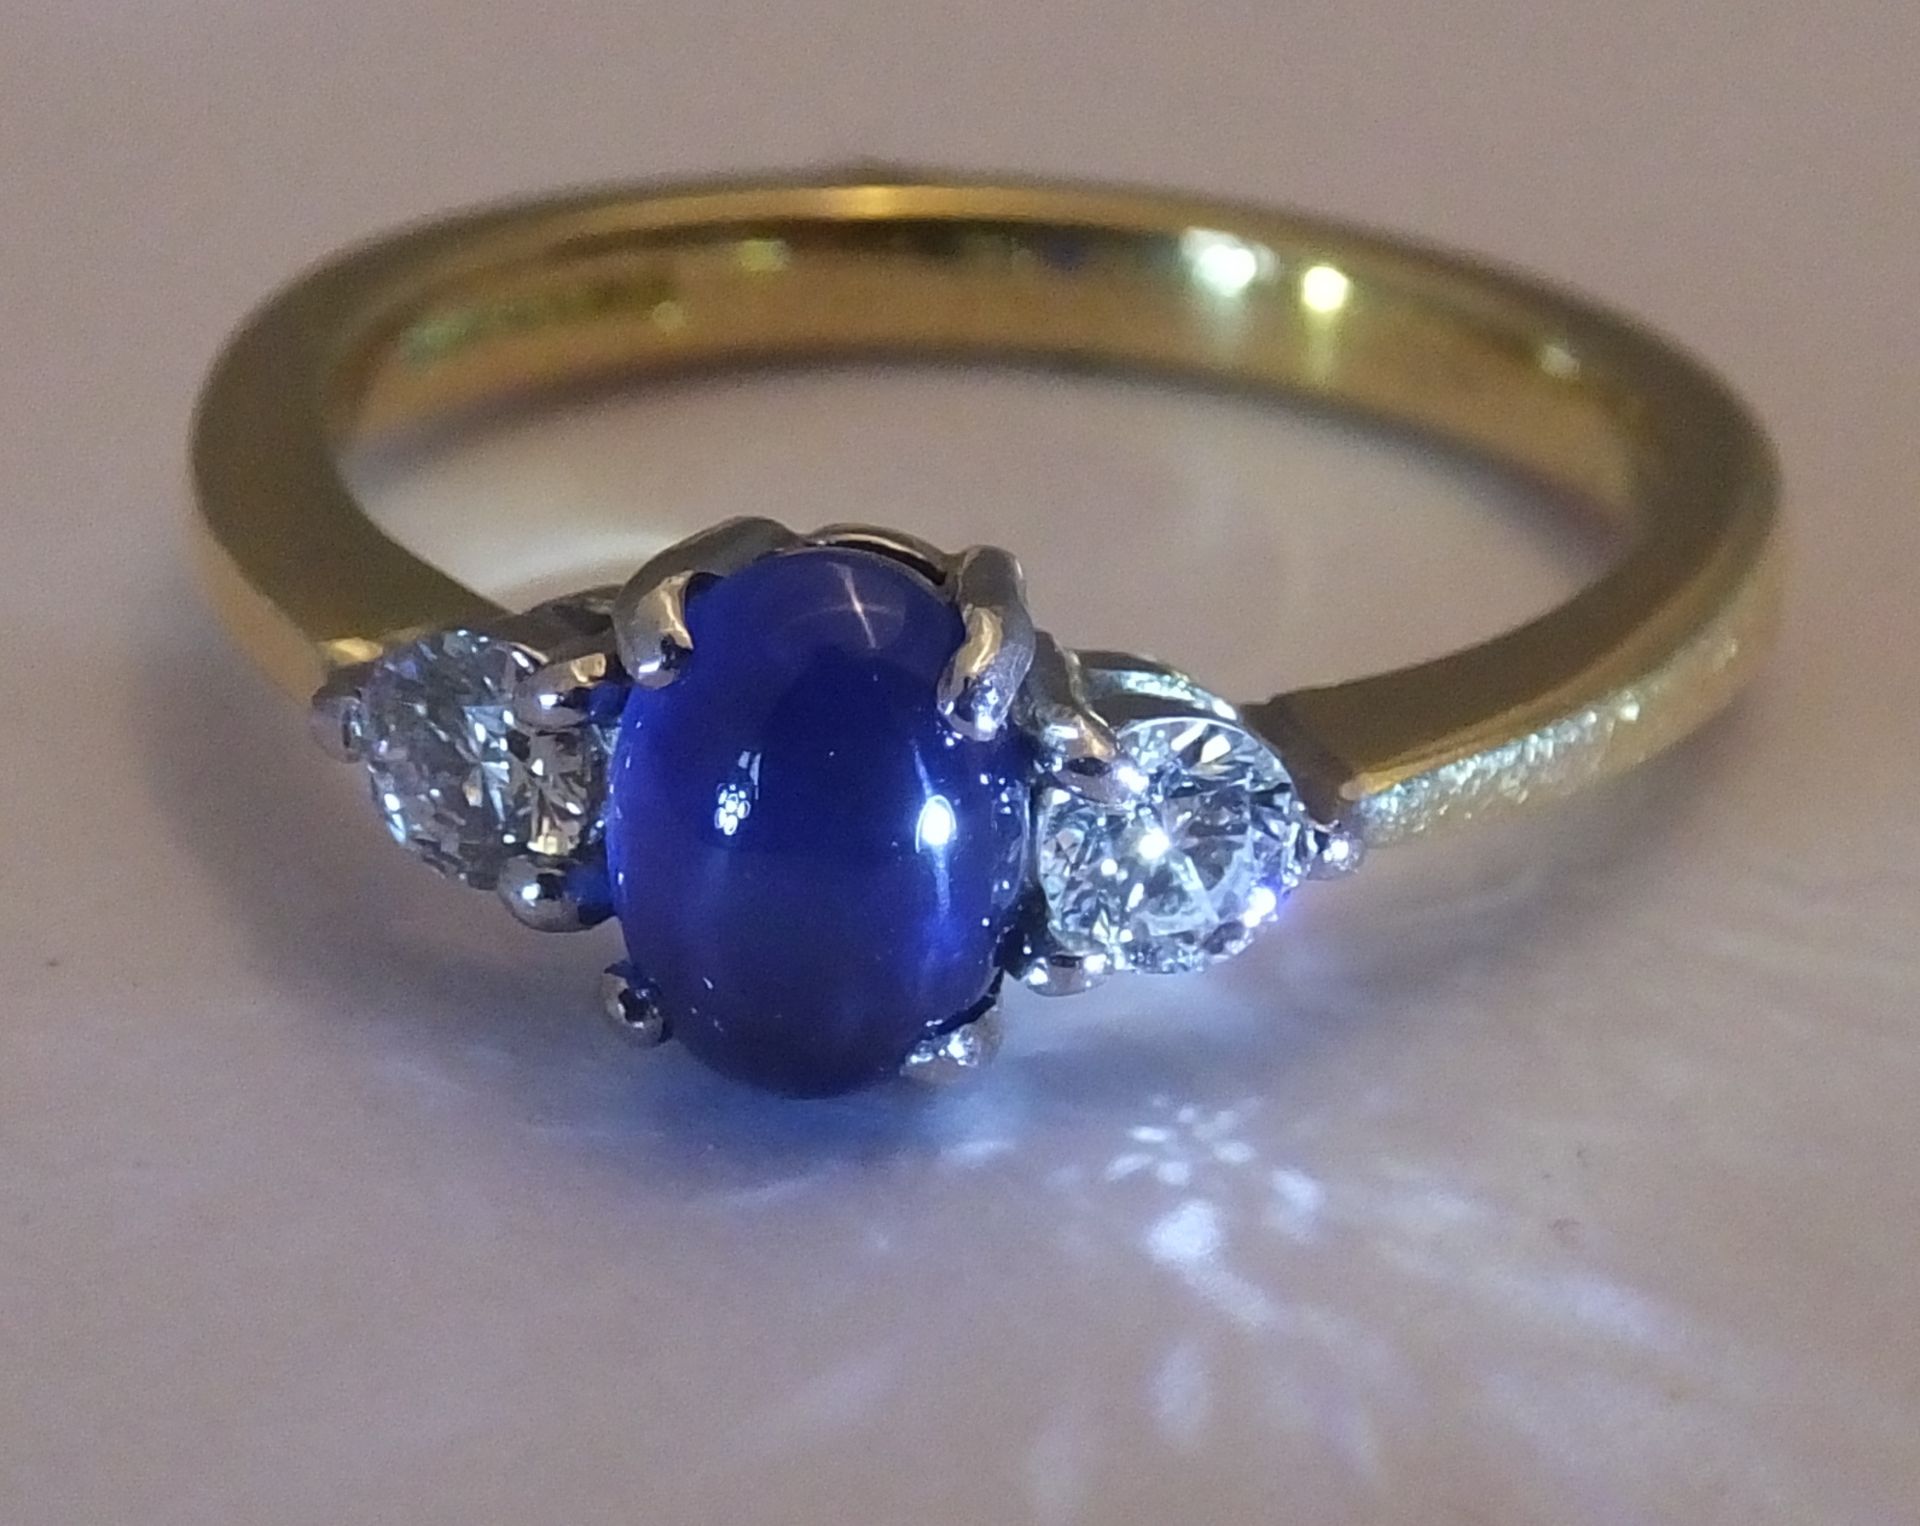 18 CT GOLD SAPPHIRE & 2 DIAMOND TRILOGY RING - Size P - A STUNNING SAPPHIRE CABOUCHON ALONG SIDE 2